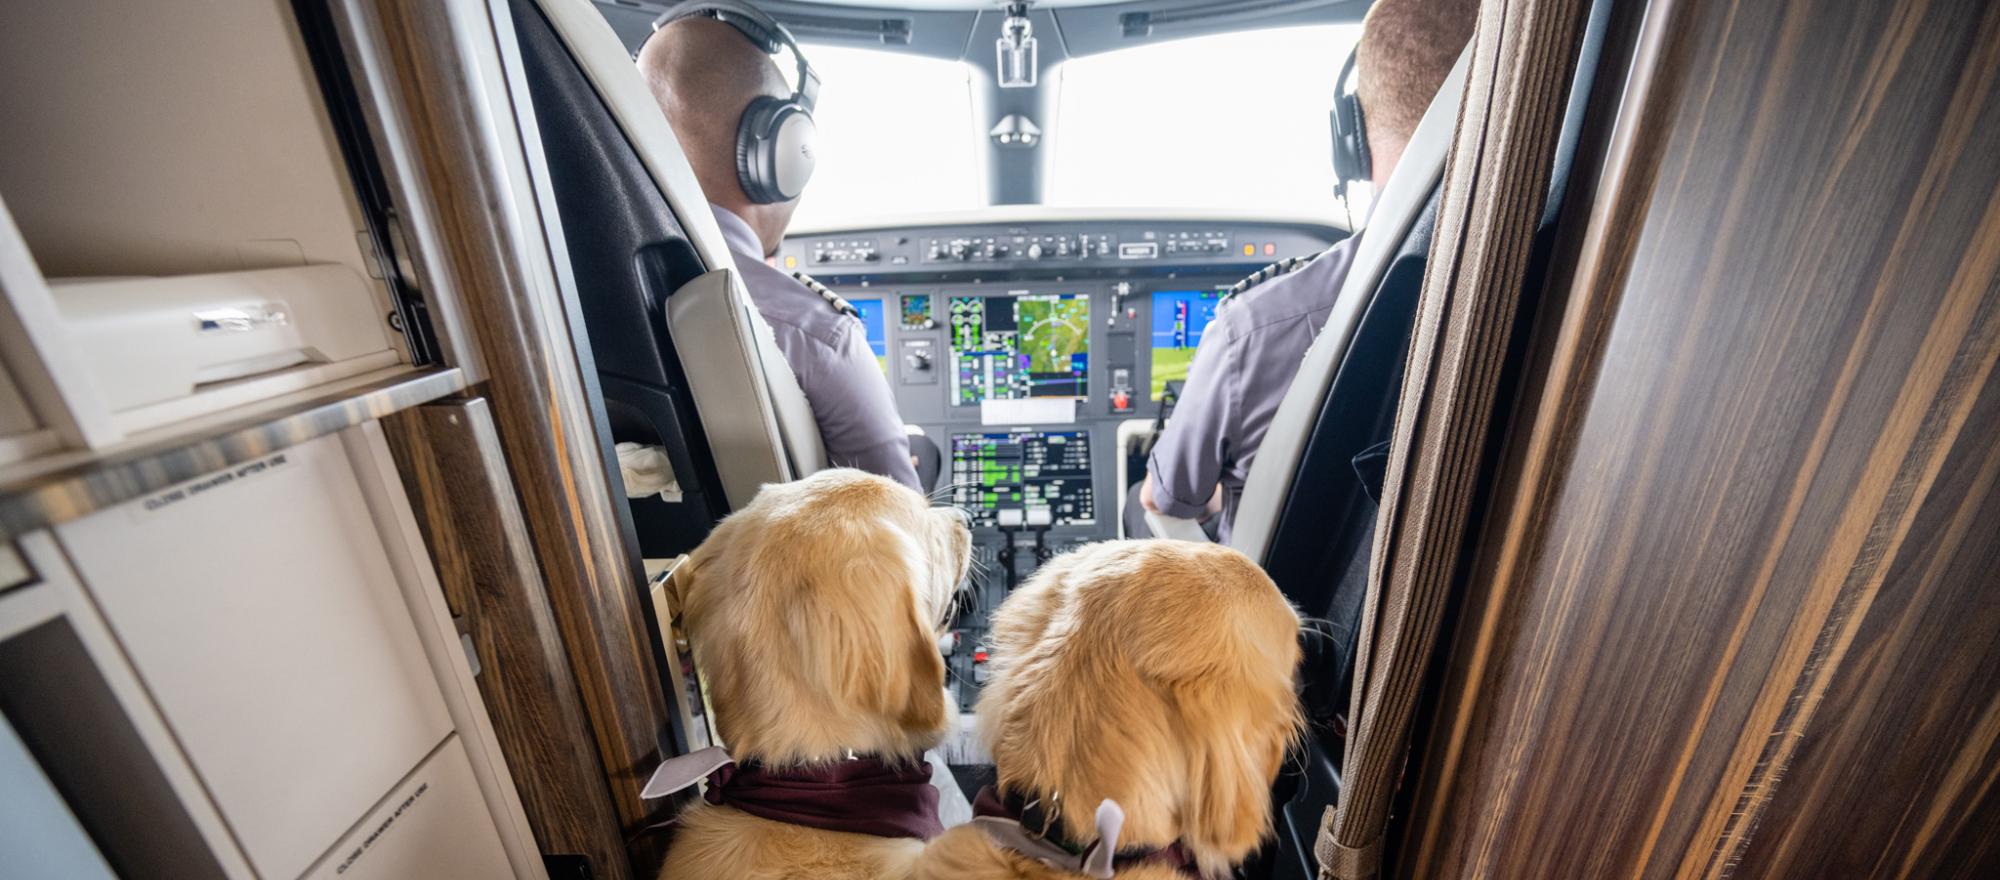 Hospital support dogs Loki and Natasha observe the pilots in the cockpit